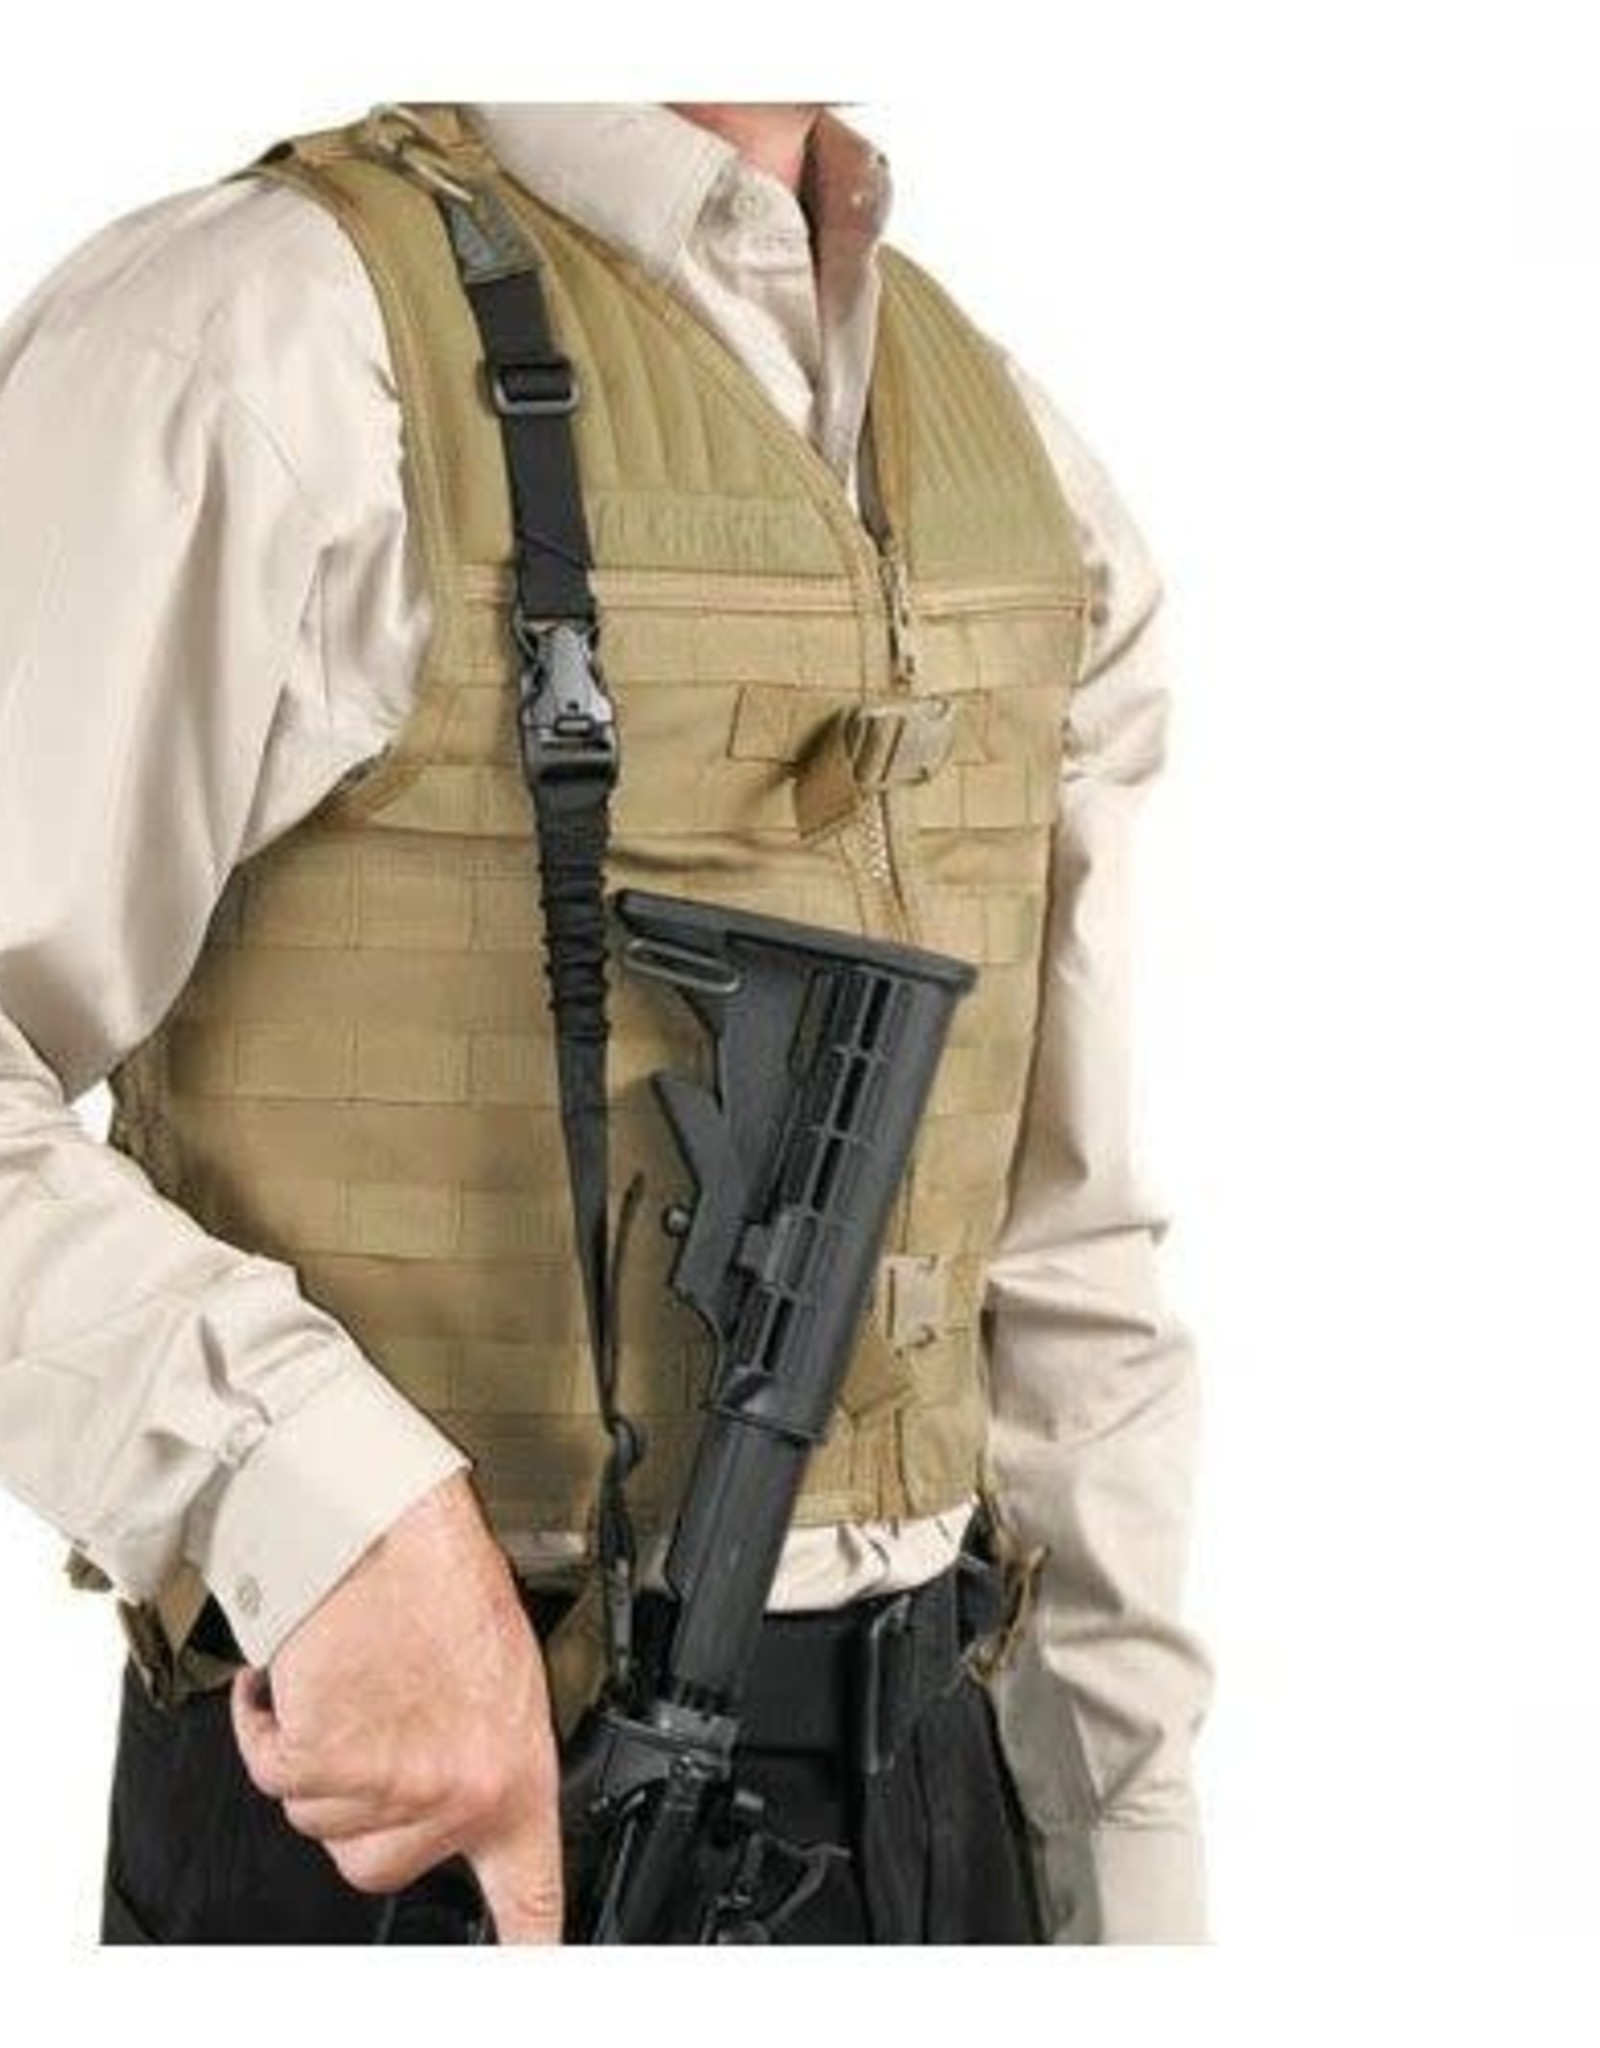 S.T.R.I.K.E. Tactical Release Sling - Tacticality Workwear